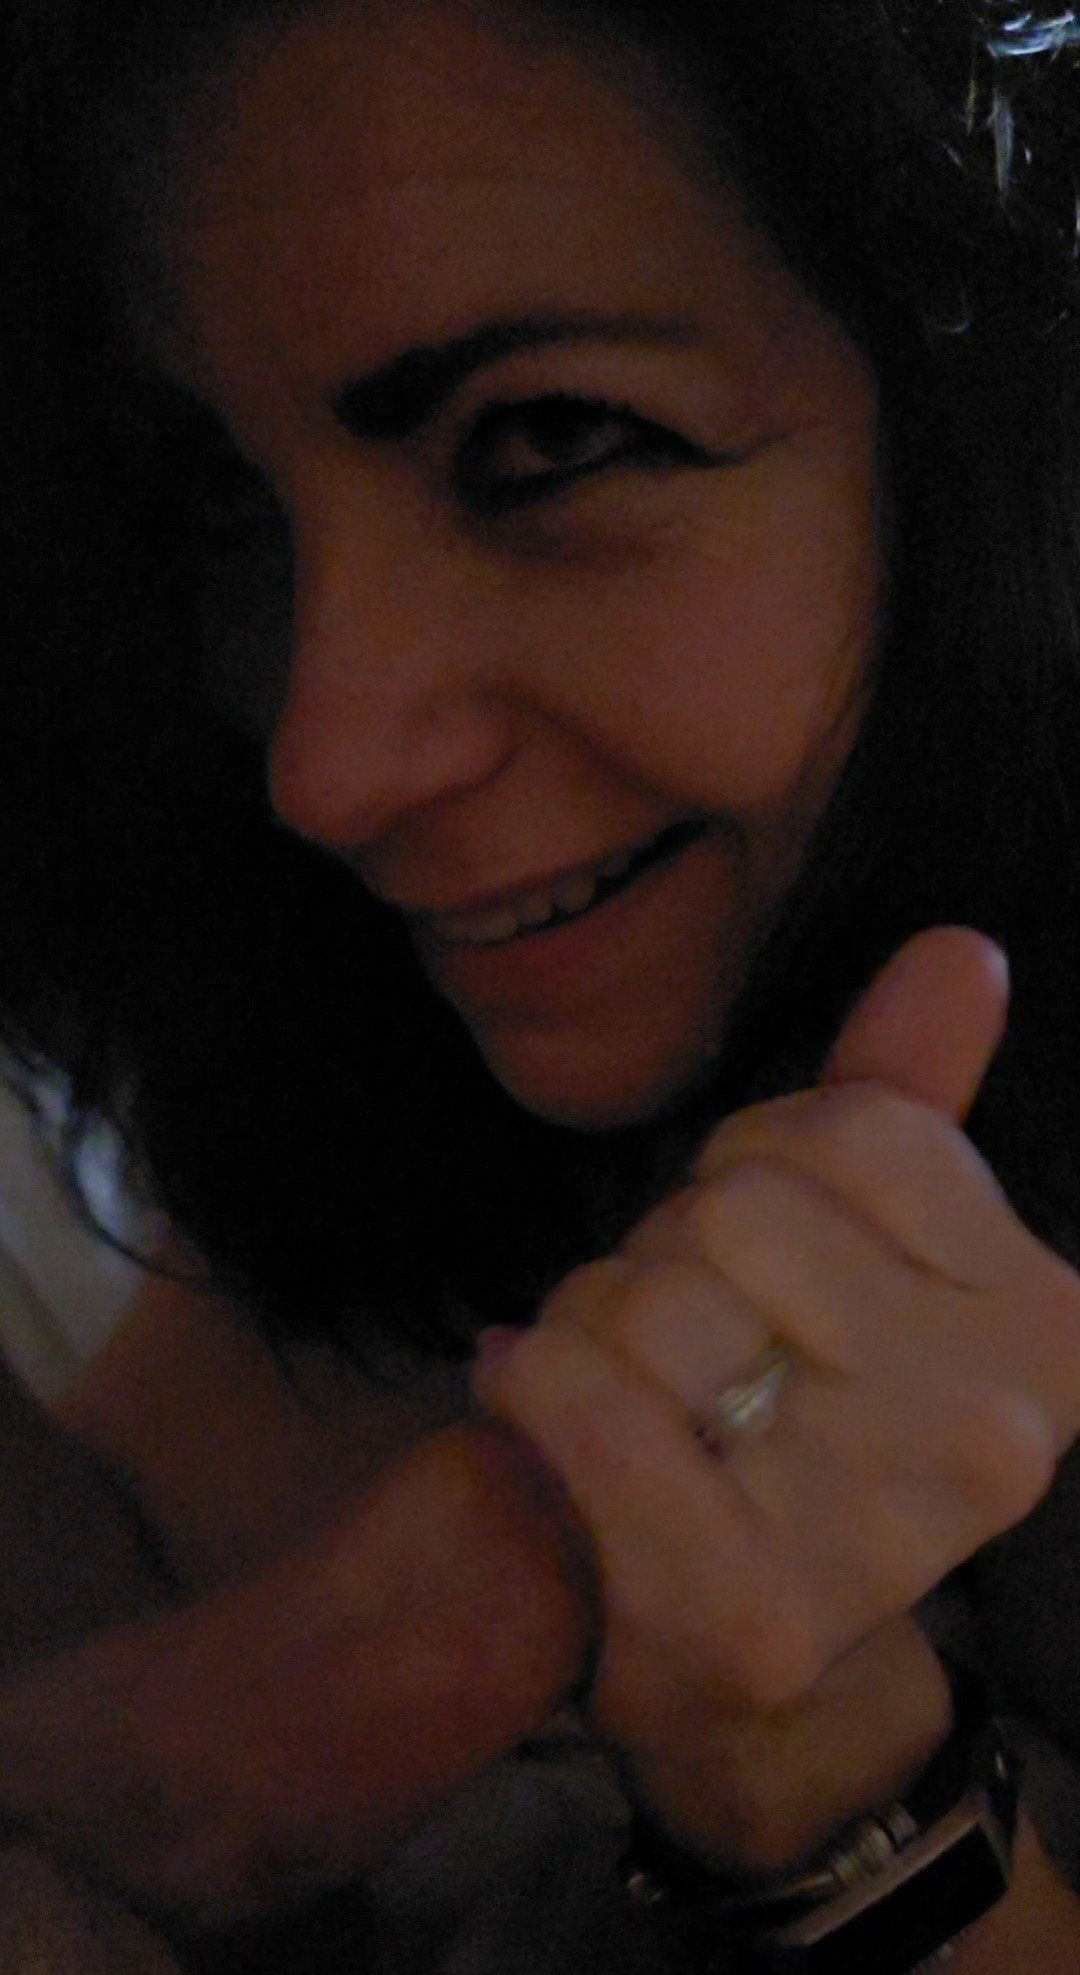 Photo by Sixfive with the username @Sixfive, who is a verified user,  December 16, 2022 at 3:38 PM. The post is about the topic Hotwife and the text says 'The wedding ring, cock in hand, that sexy smile and pretty lips. Those eyes! My gorgeous hotwife @Blueeyes13'